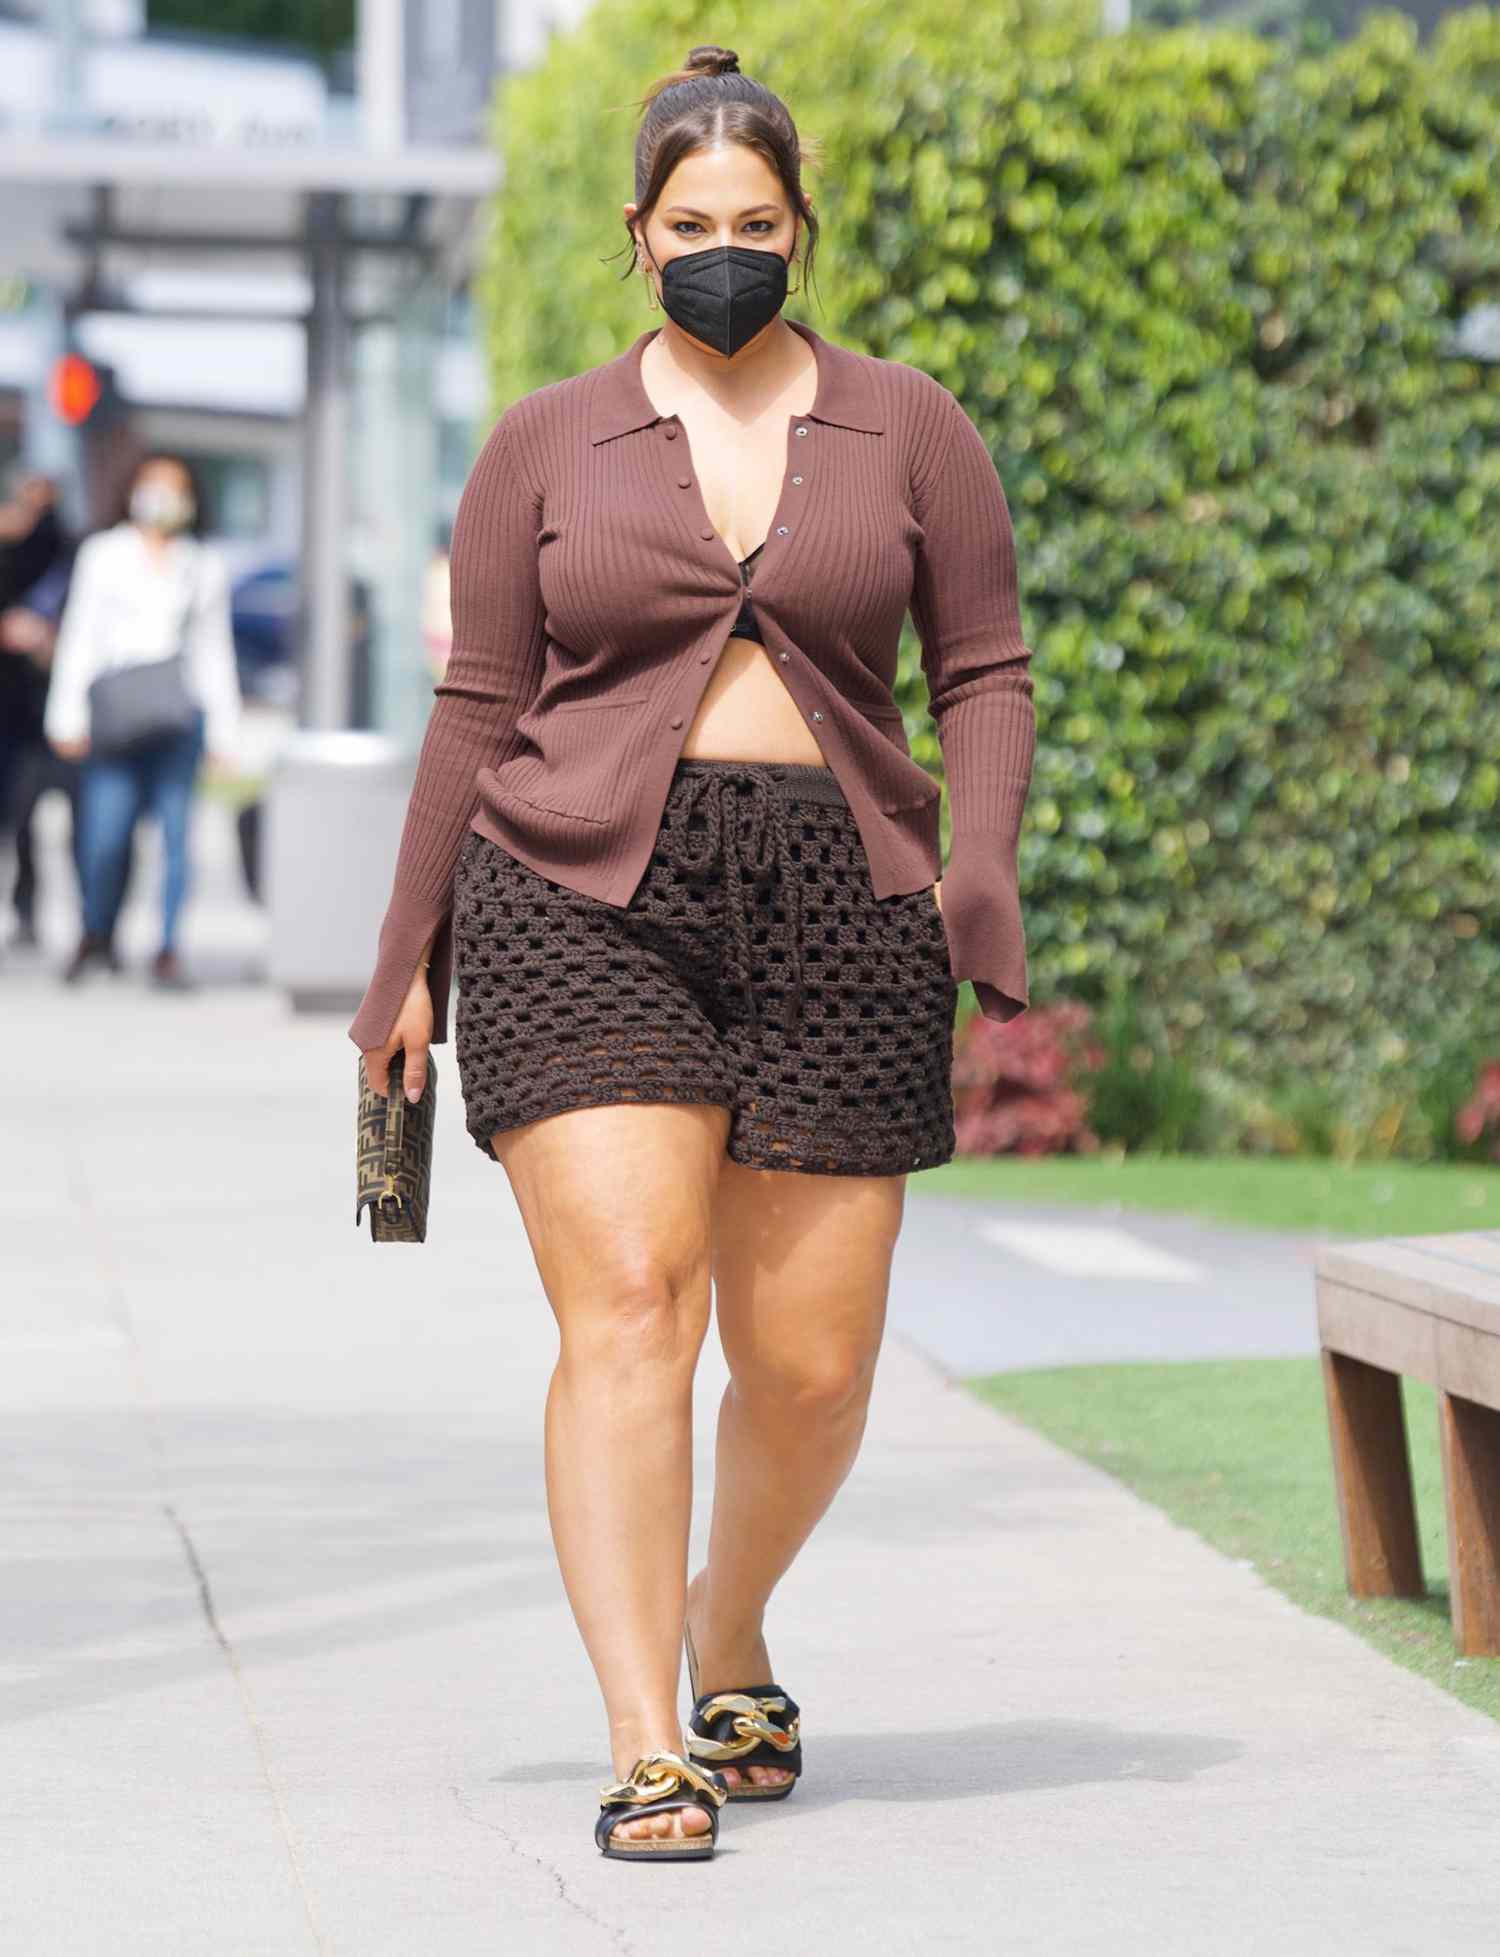 Ashley Graham was spotted out in West Hollywood, as she made her way to Soho House